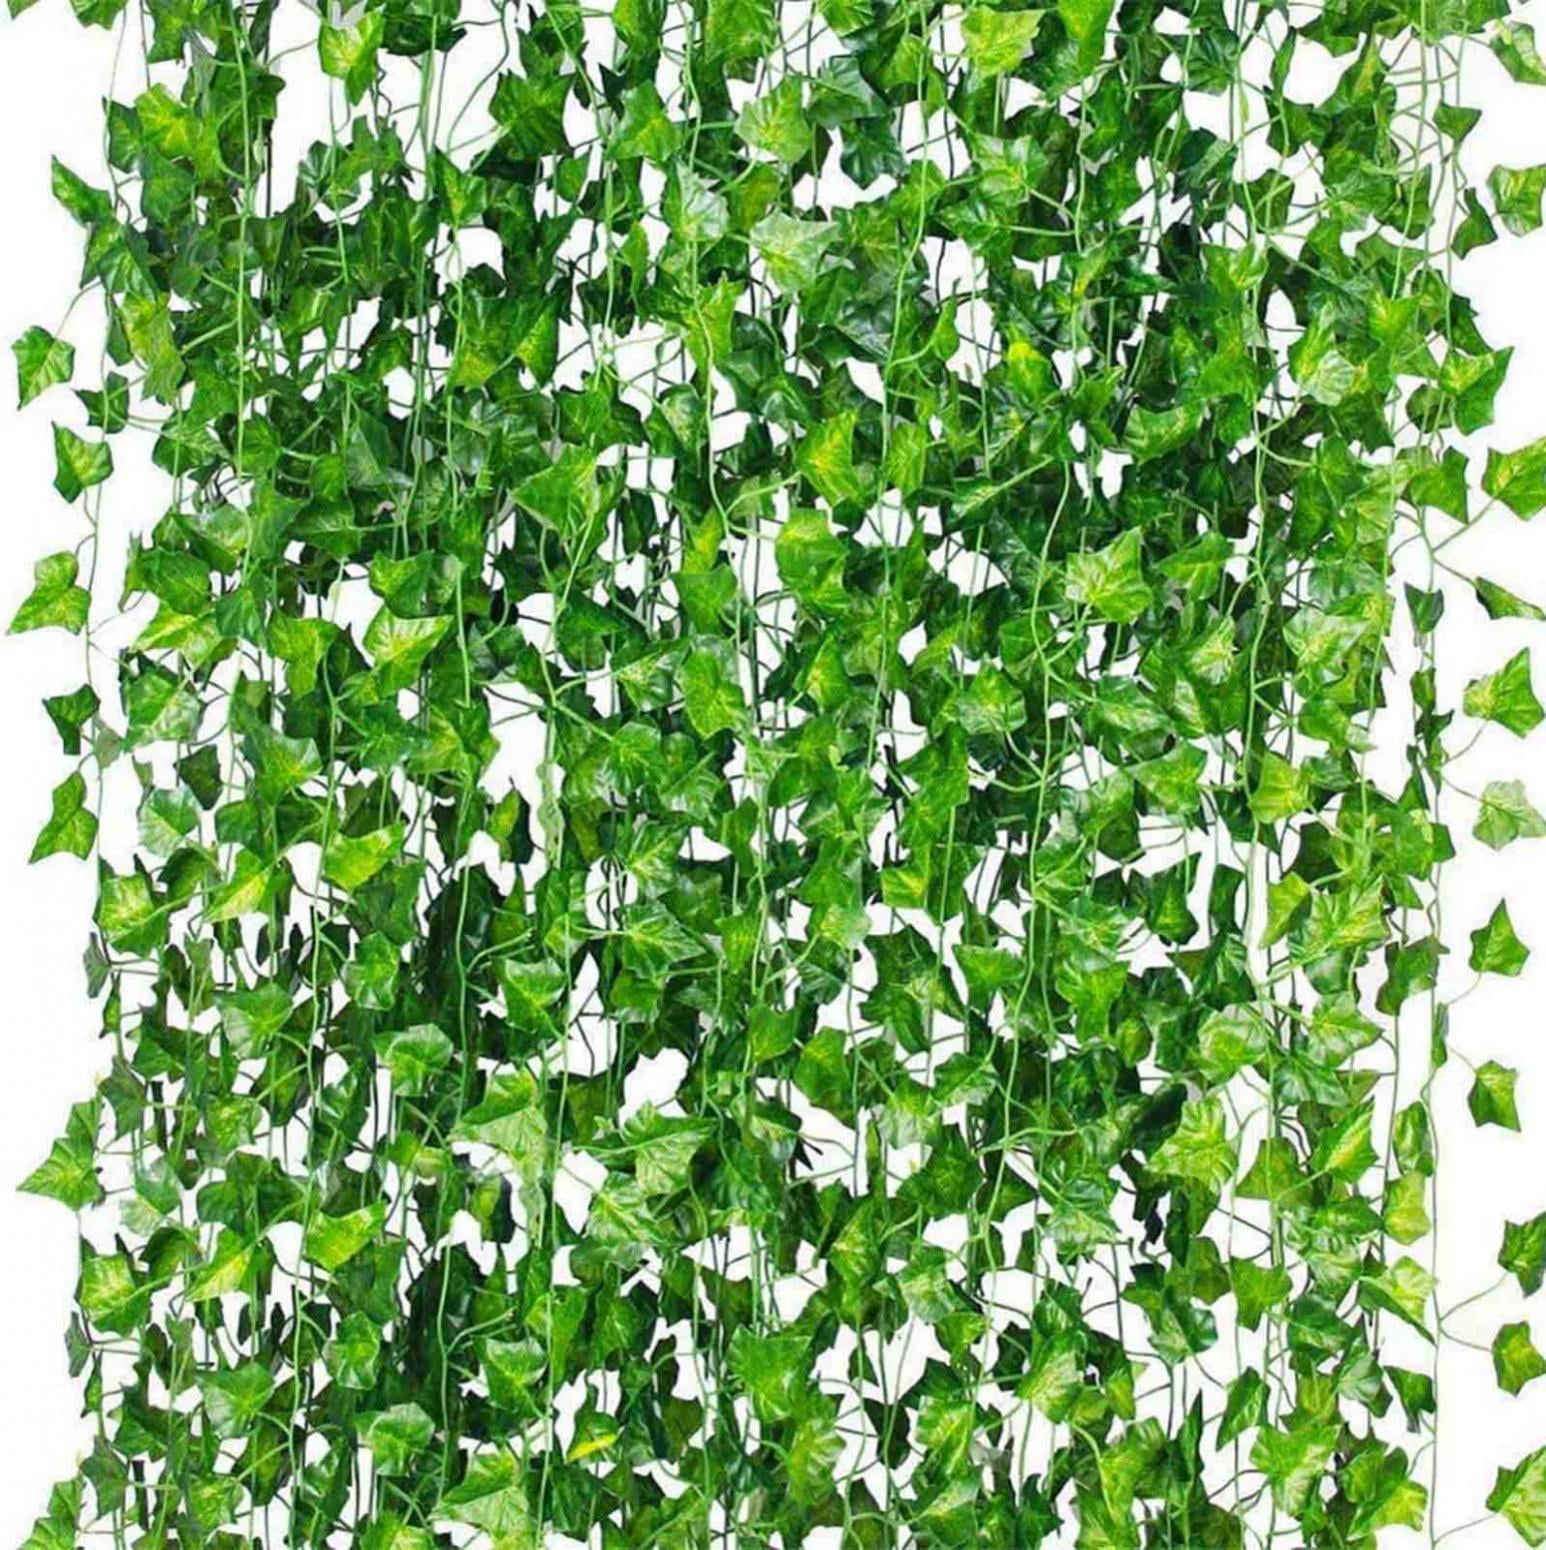 Artificial Ivy Garland, Fake Vines with UV-proof Green Leaves and Fake  Plants Hanging Aesthetic Vines Are Suitable for Family Bedroom Parties,  Garden